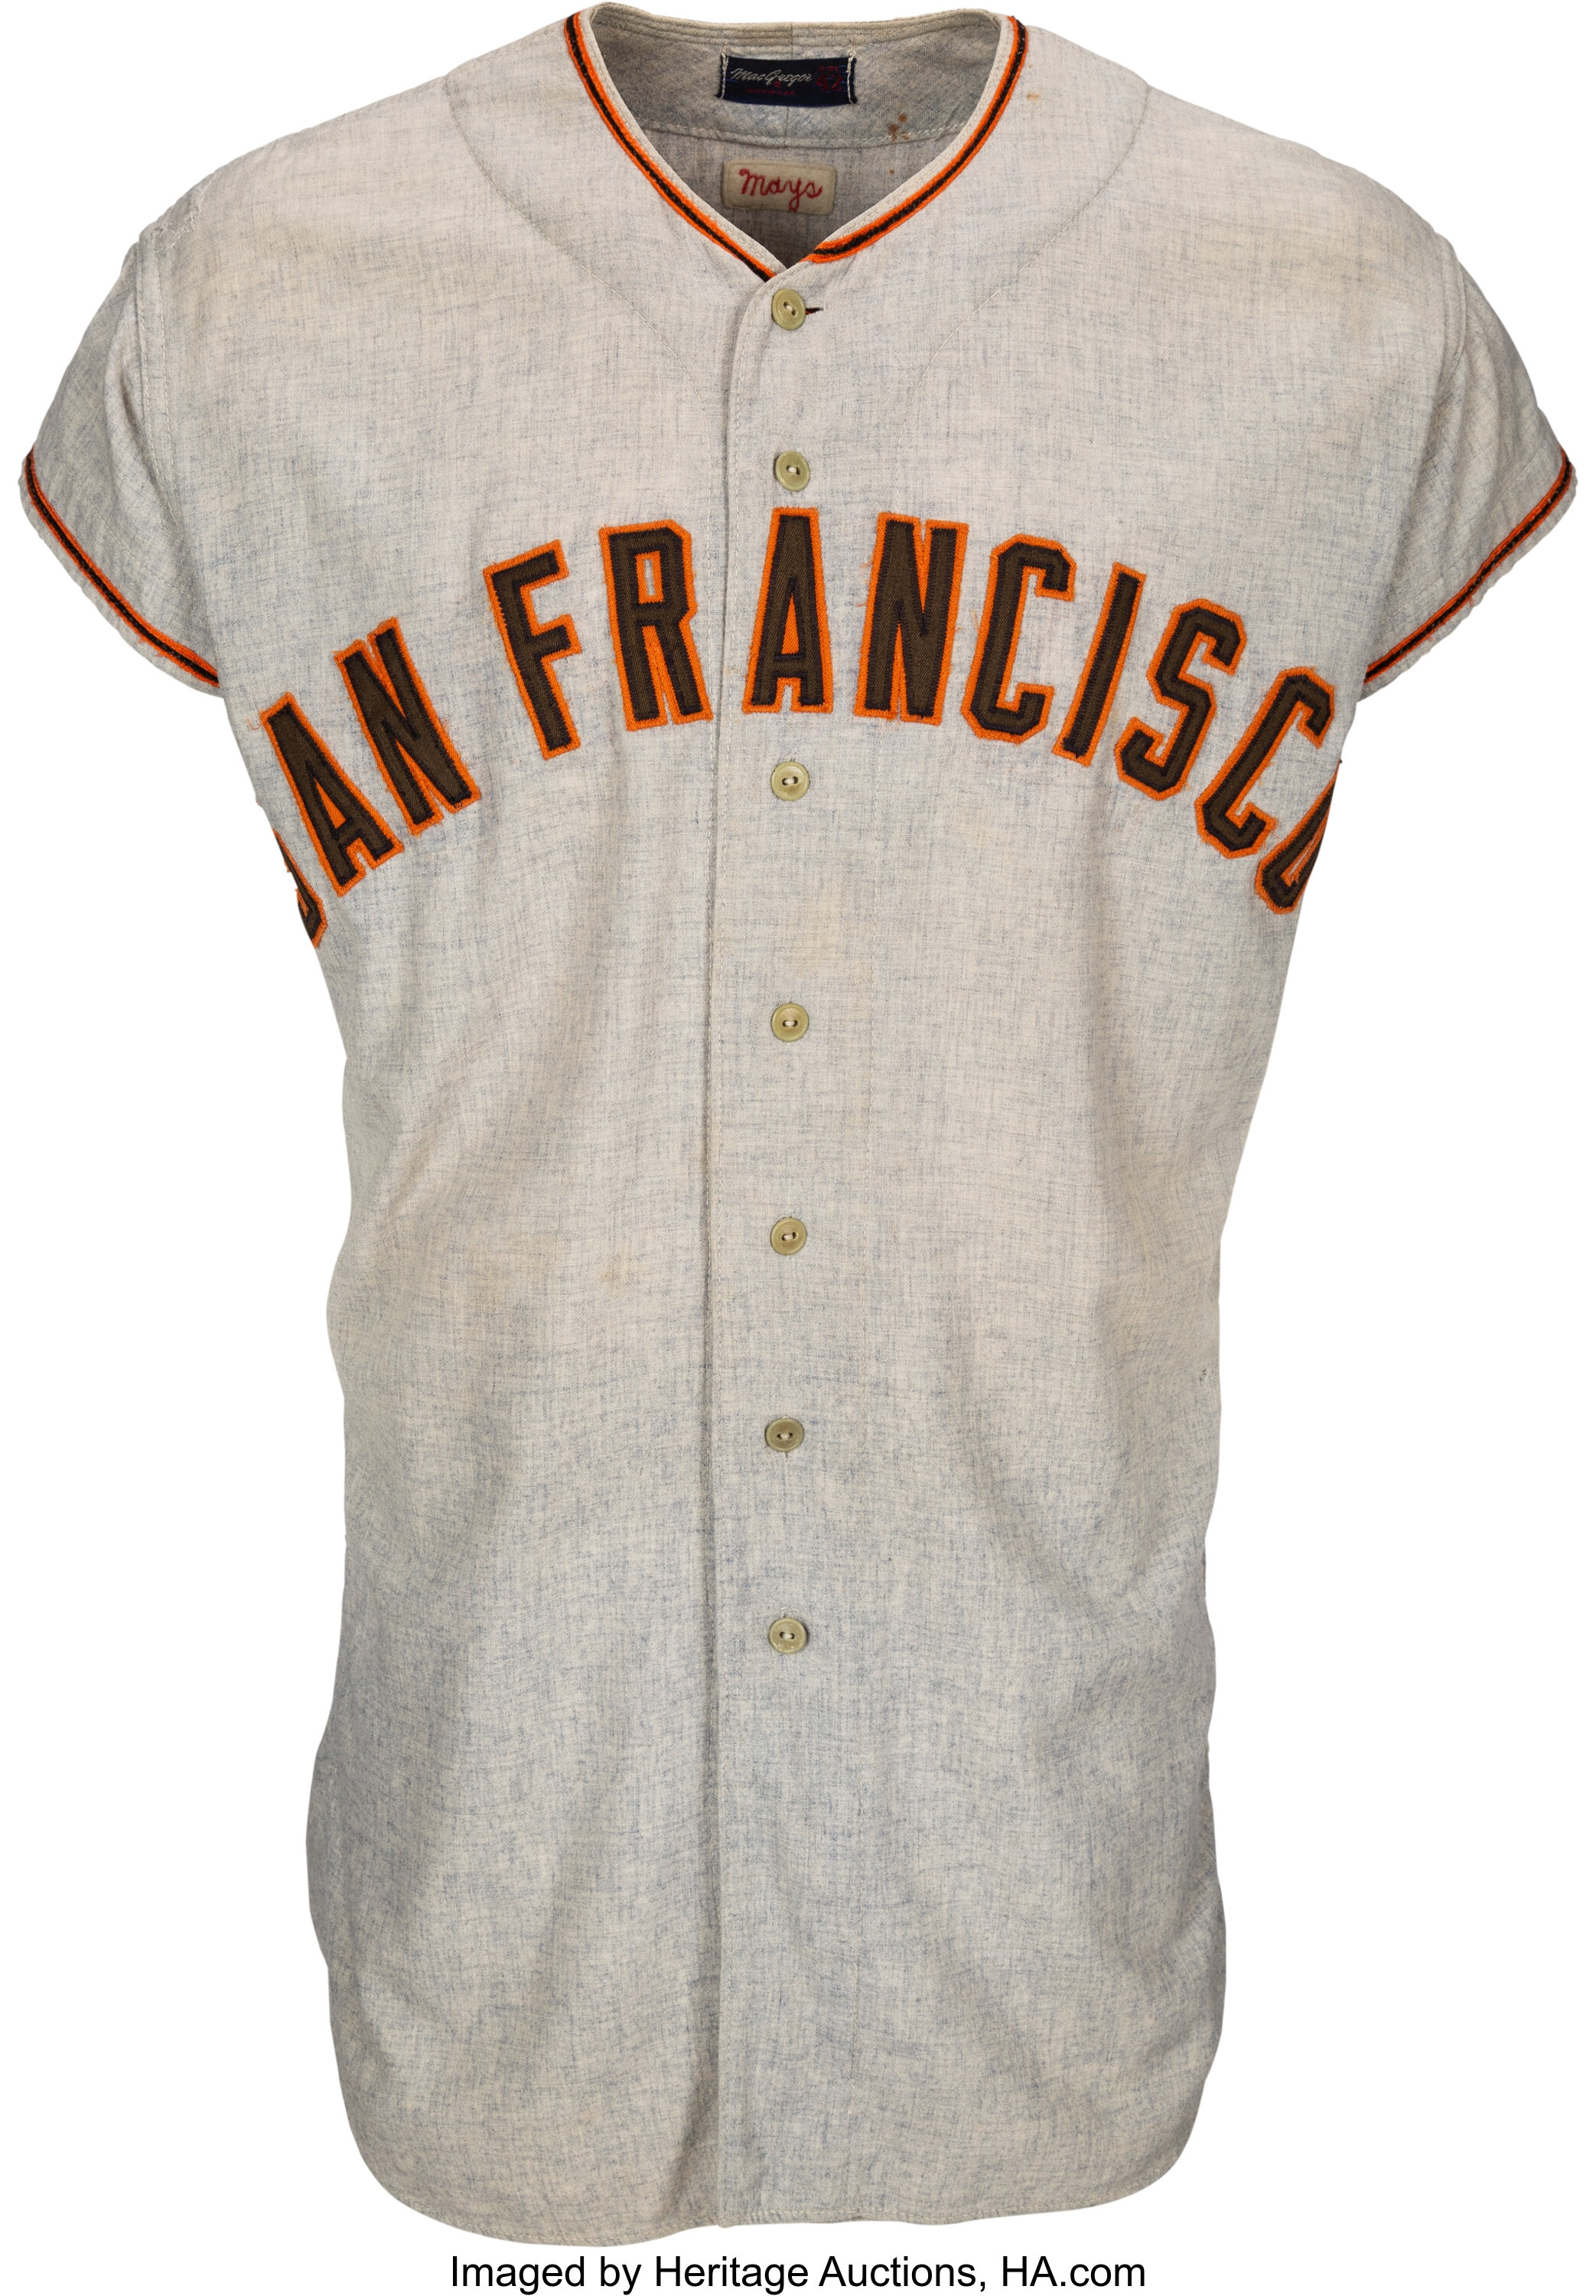 Earliest Known Willie Mays Pro Jersey Consigned to Auction